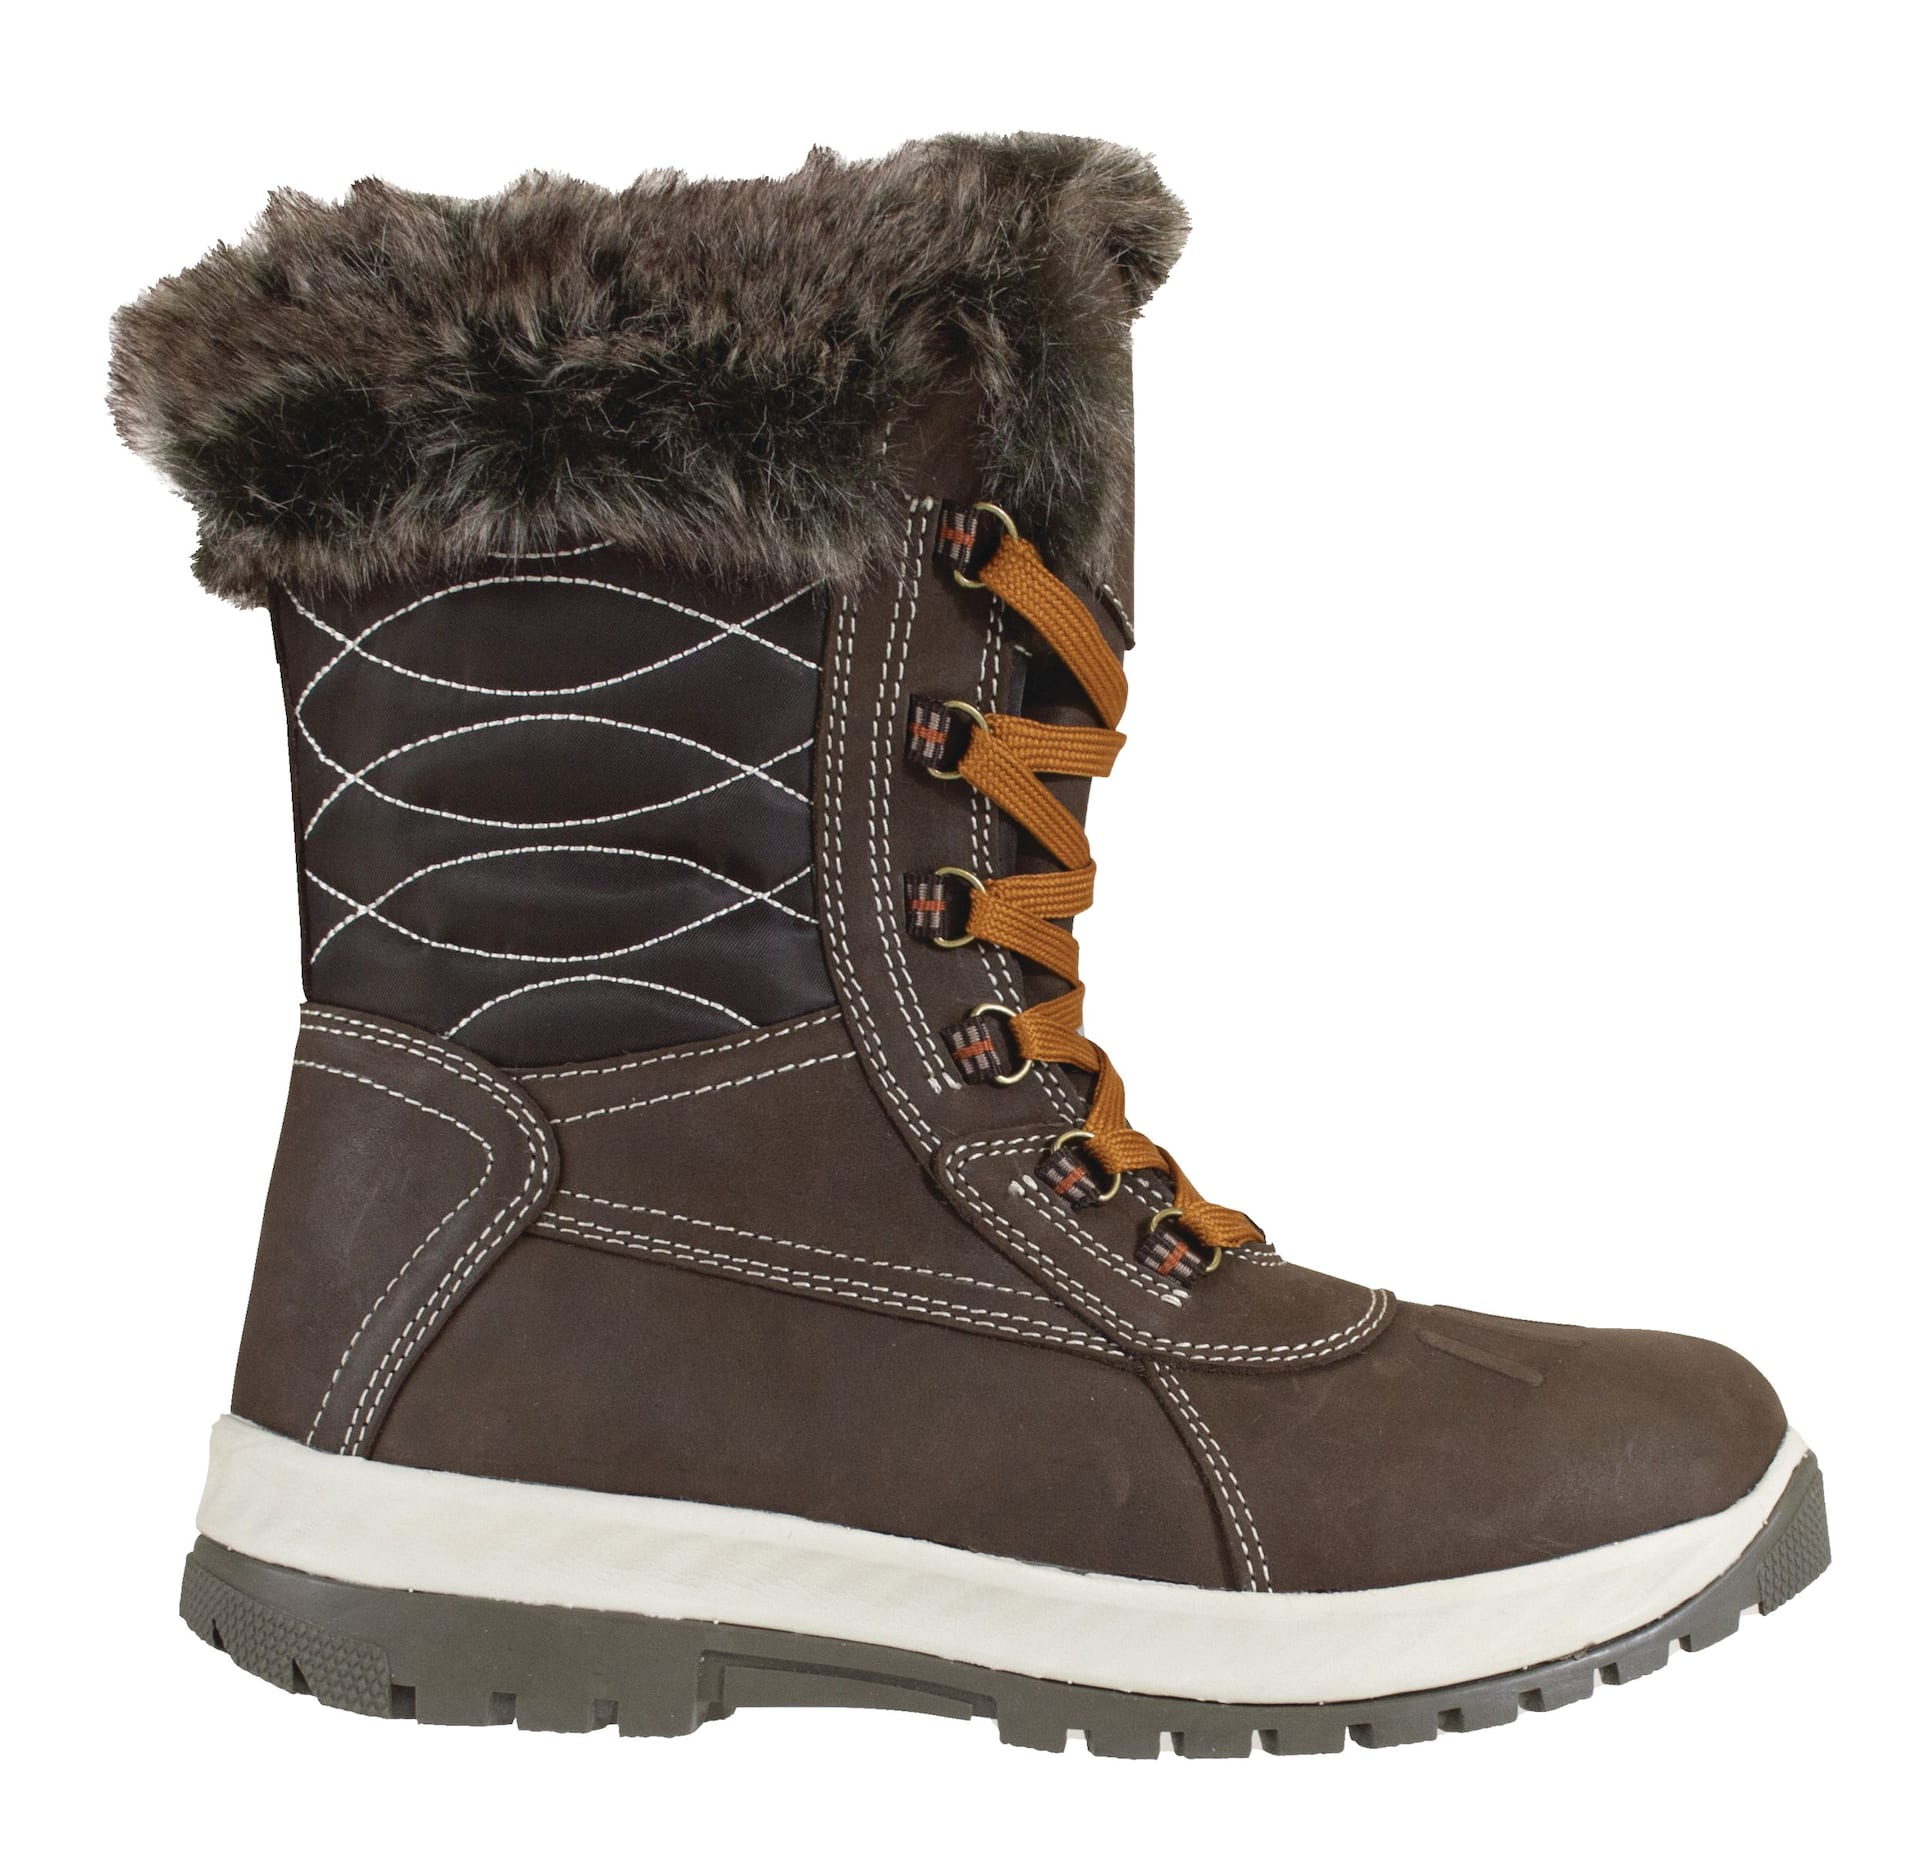 Outbound Women's Muskoka Insulated Water-Resistant Winter Snow Boots Cozy  Knit Cuff, Brown